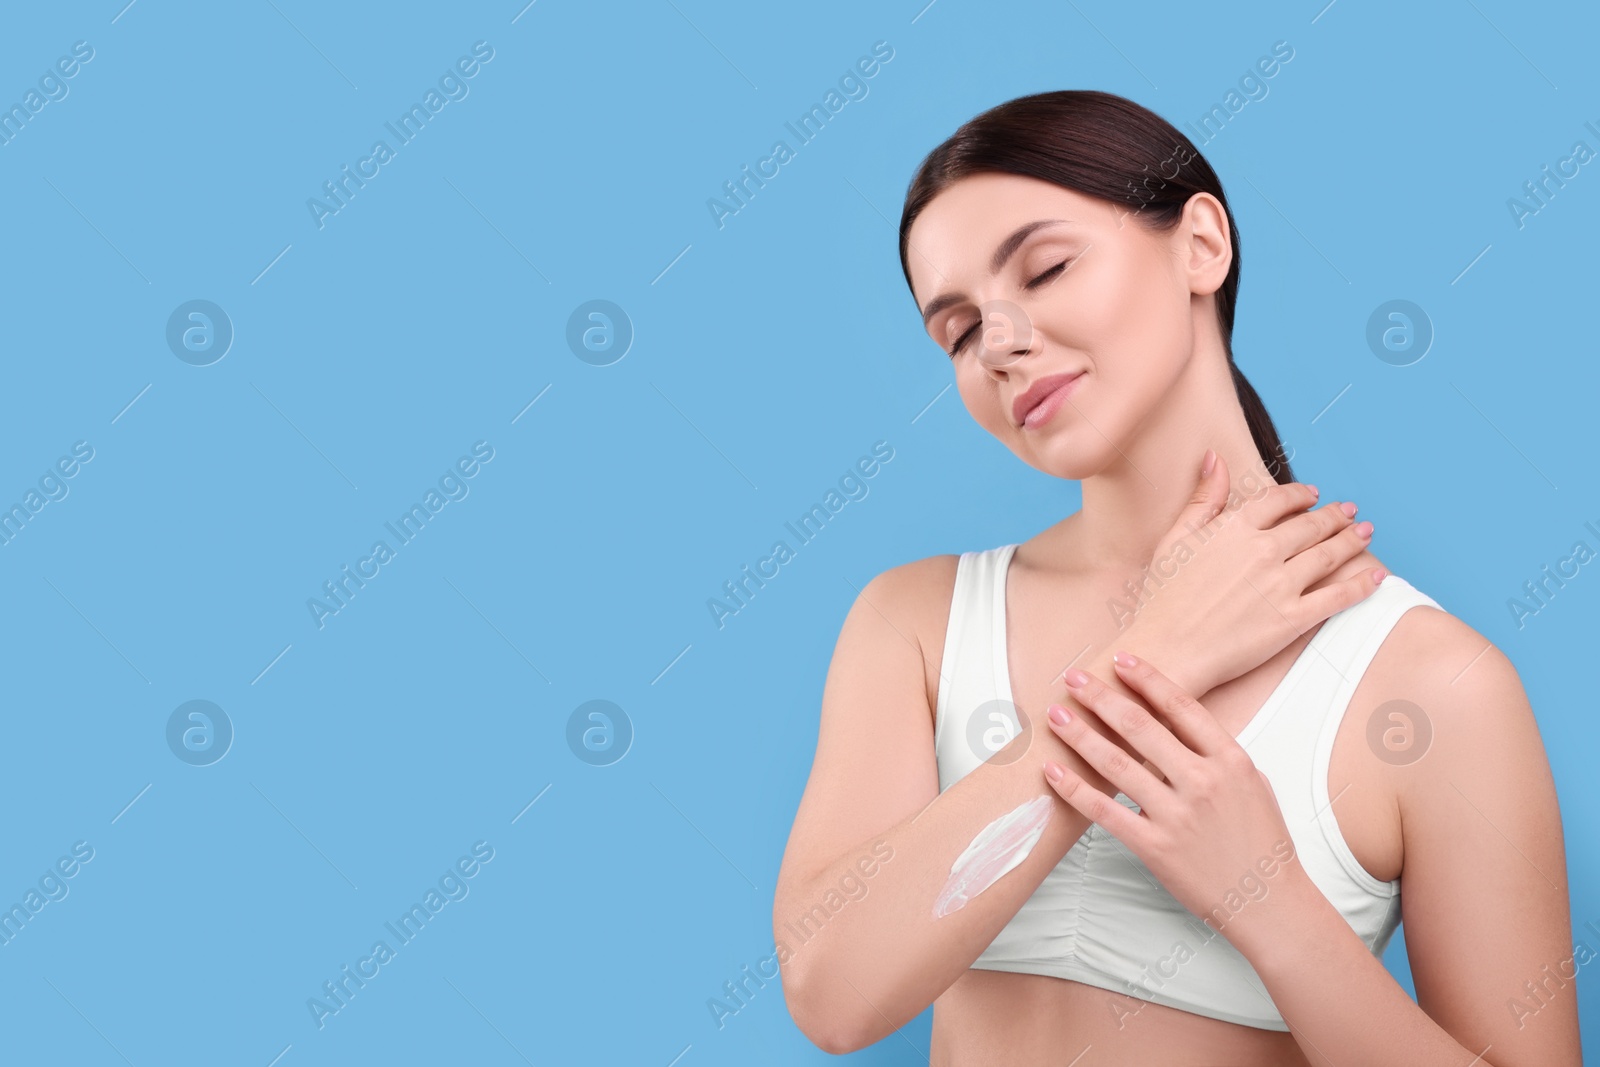 Photo of Beautiful woman with smear of body cream on her arm against light blue background, space for text